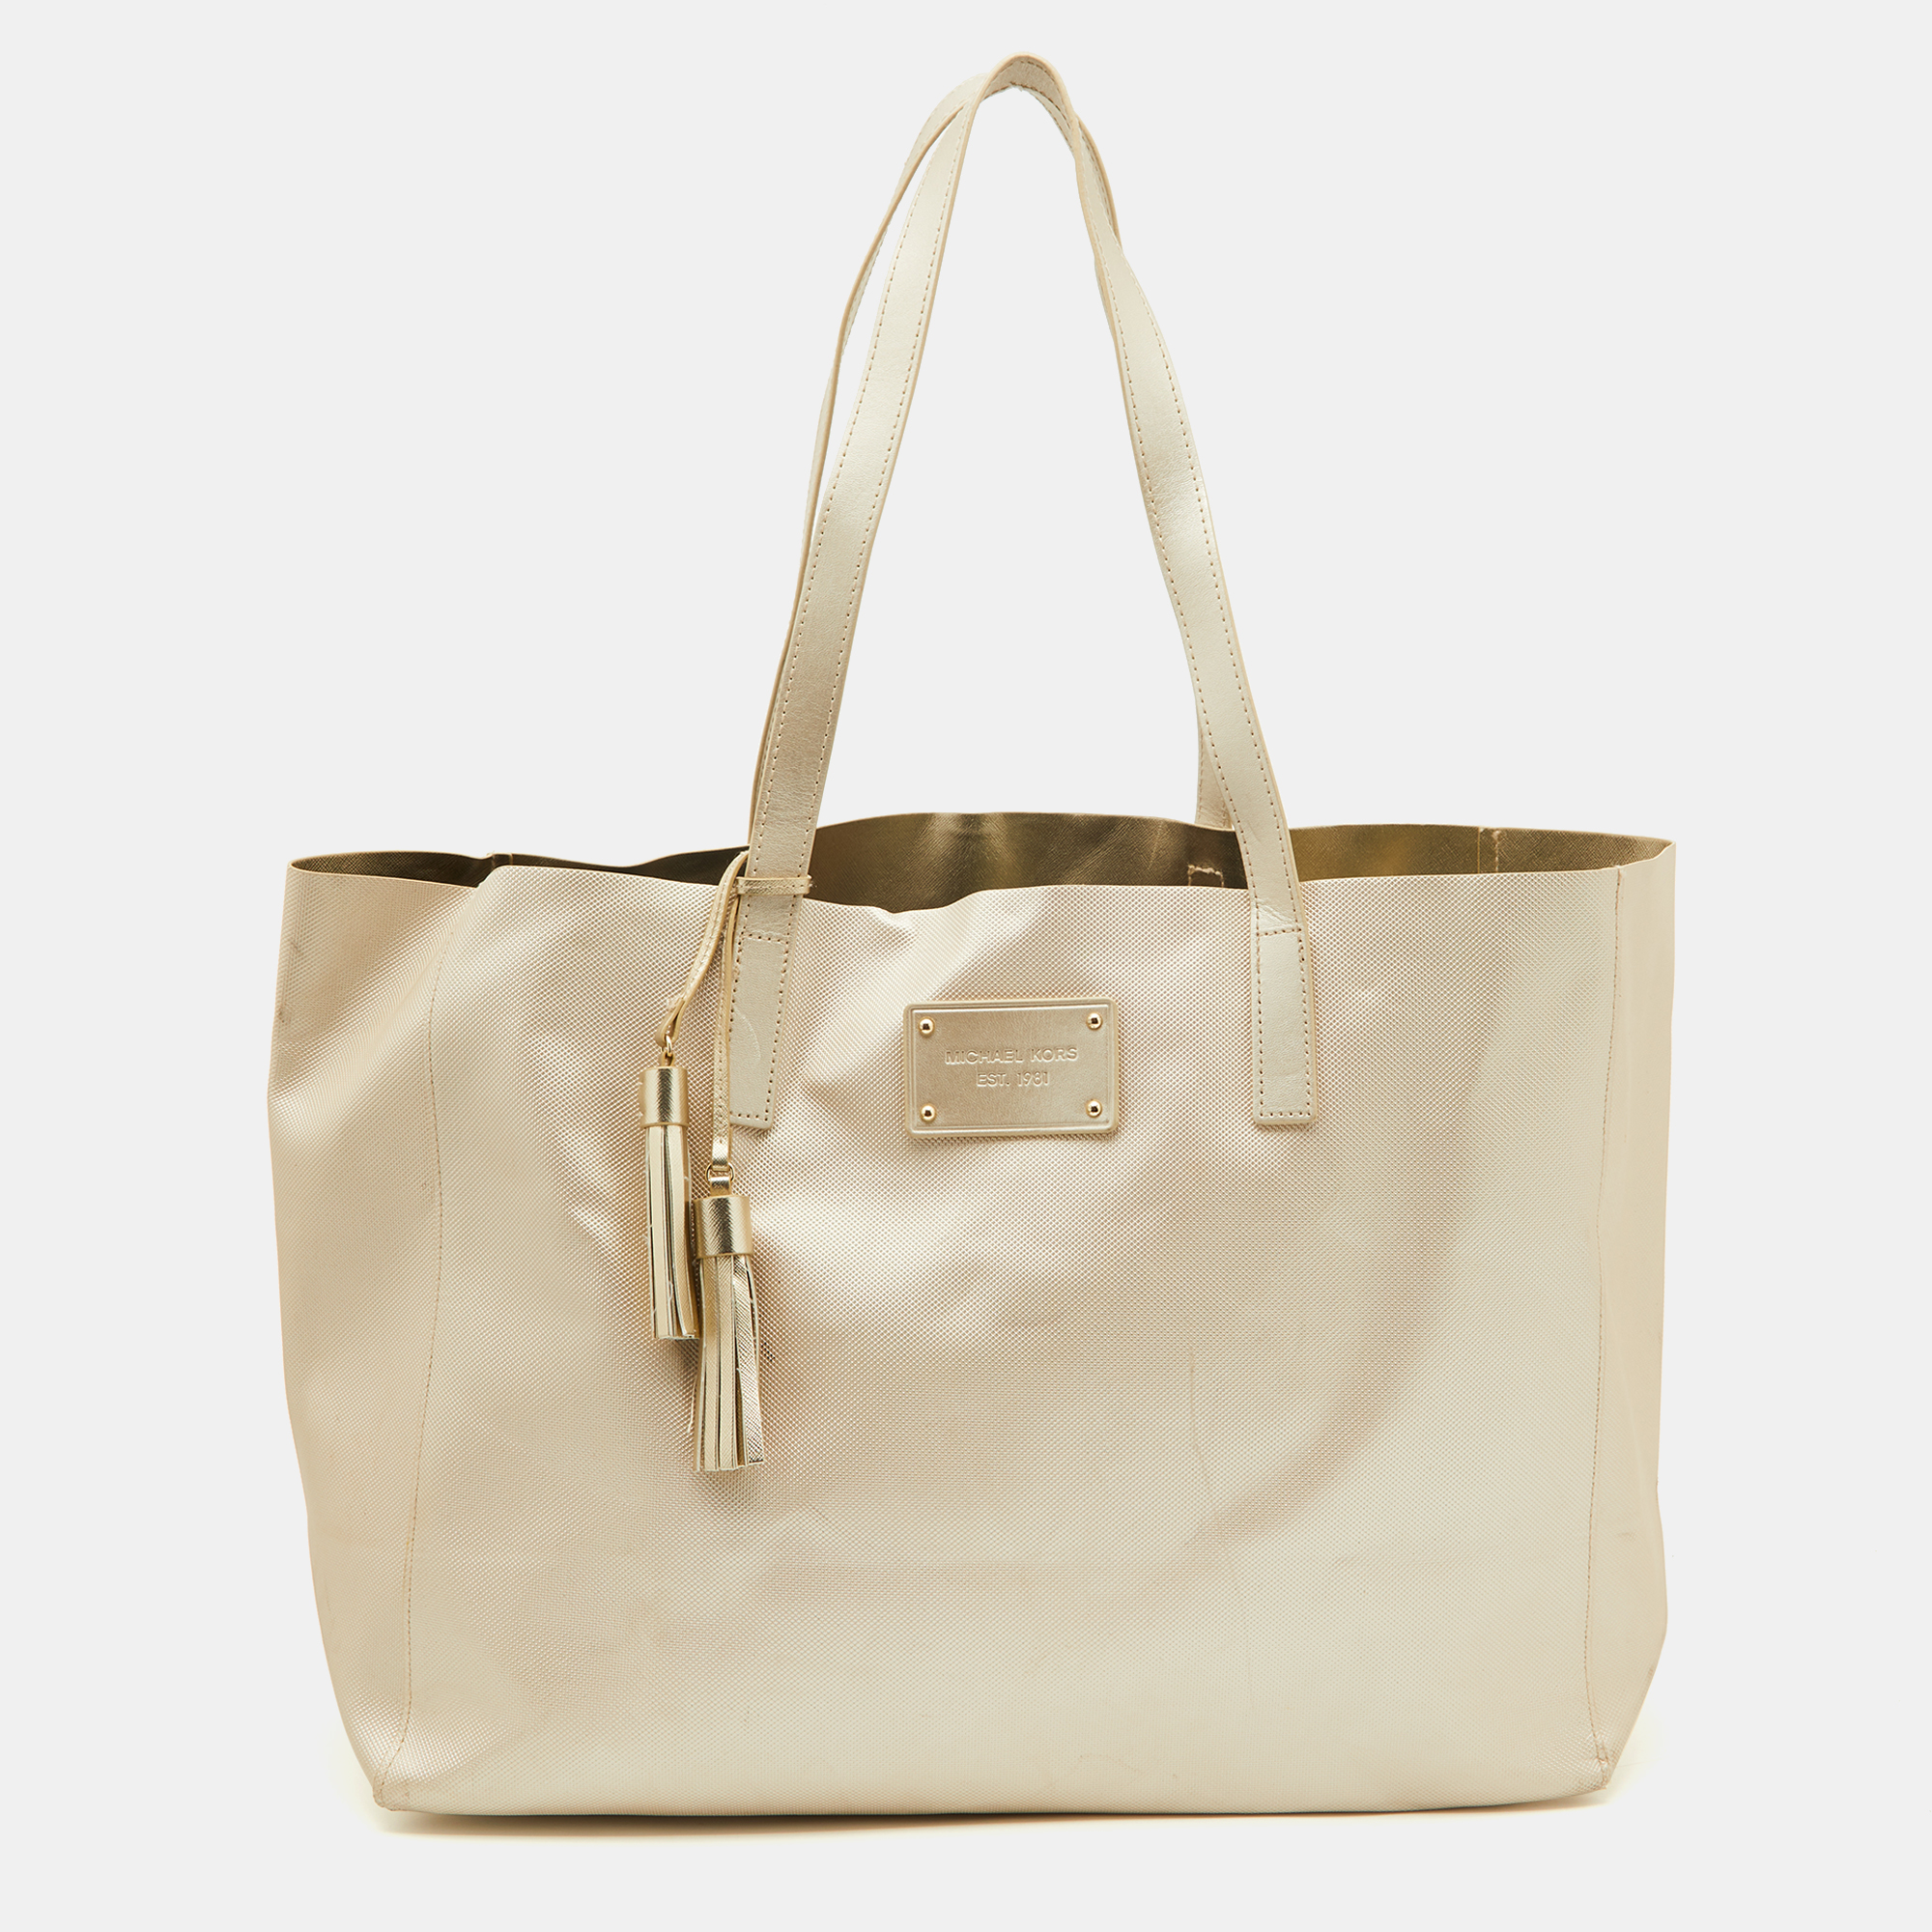 This MK tote is a result of blending high crafting skills with a practical design. It arrives with a durable exterior completed by luxe detailing. It is an accessory that you can count on.